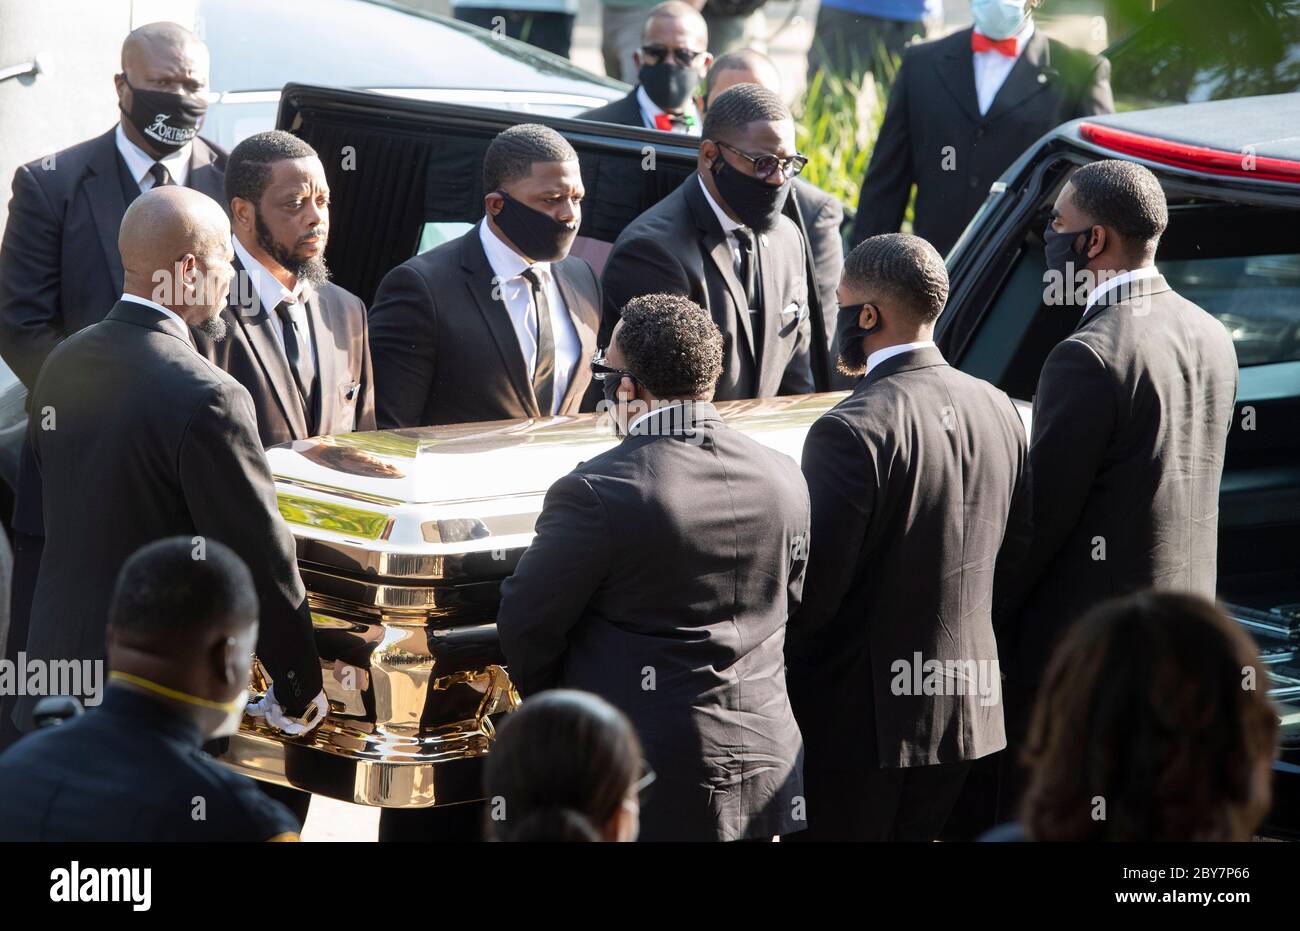 The casket of GEORGE FLOYD arrives at Fountain of Praise Church in suburban Houston June 9, 2020 for a private funeral service followed by burial in nearby Pearland. Thousands turned out for a public viewing yesterday. Stock Photo